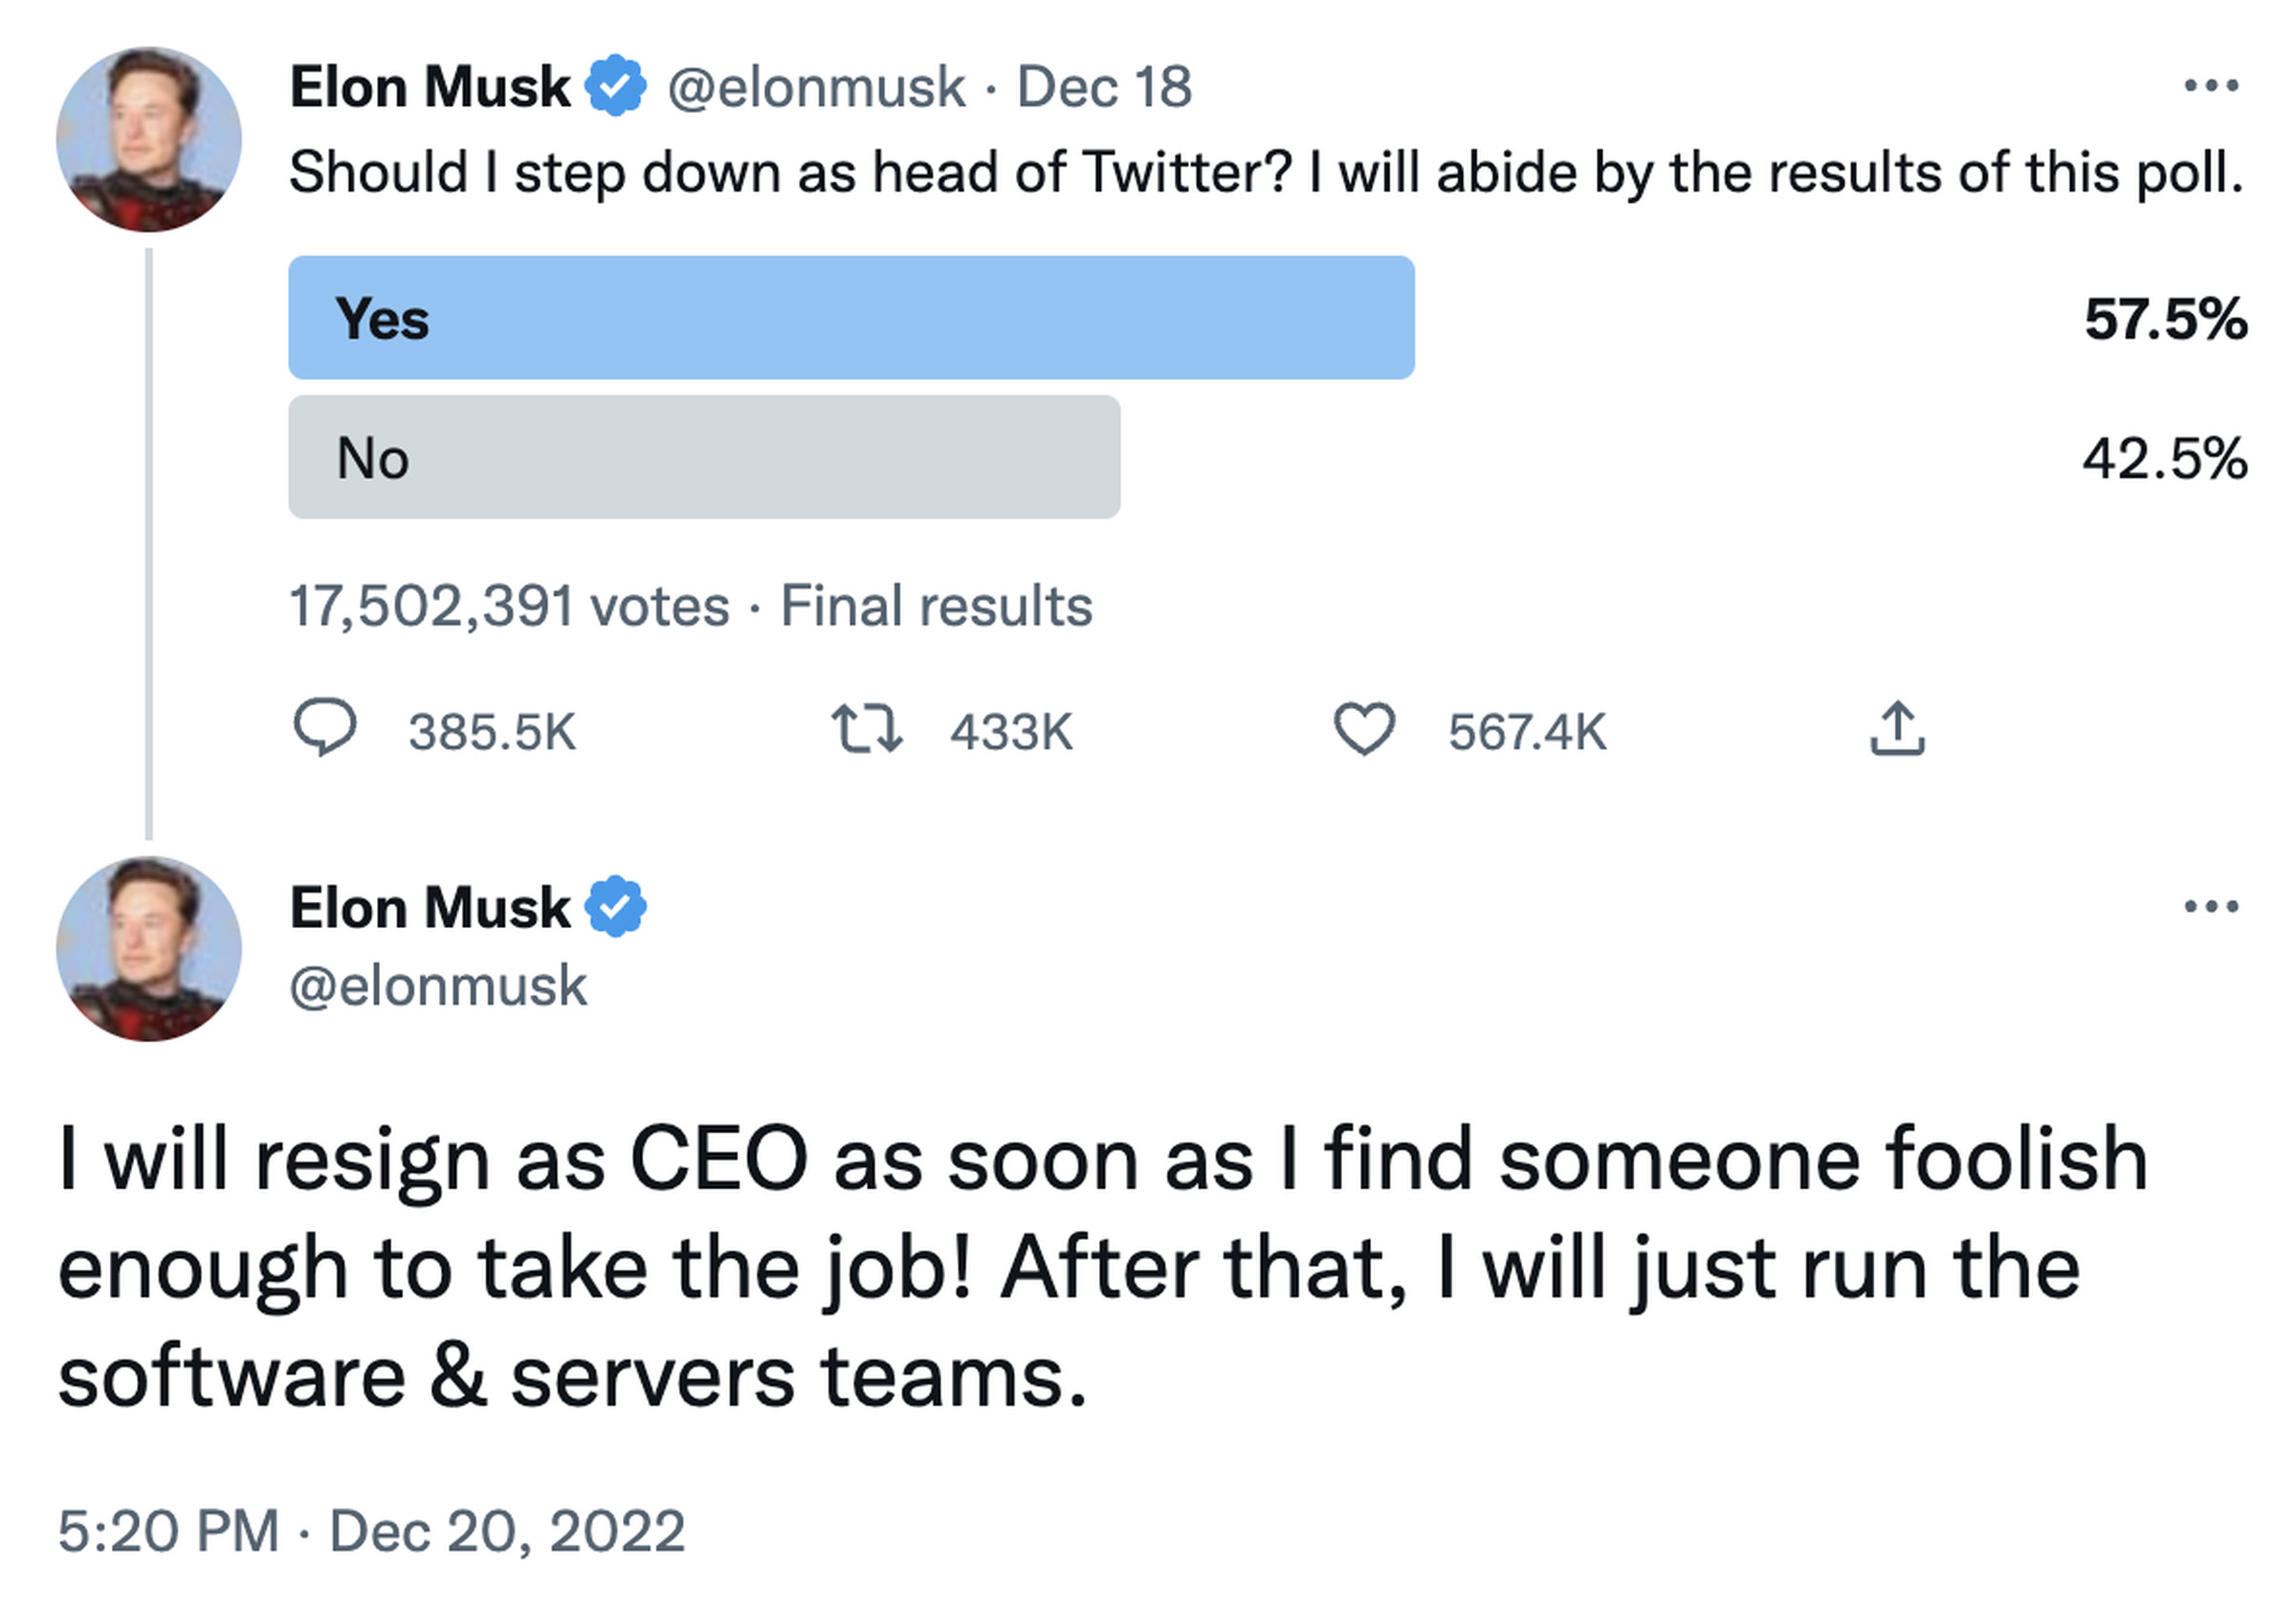 A screenshot of Elon Musk’s recent Twitter poll and his reply.